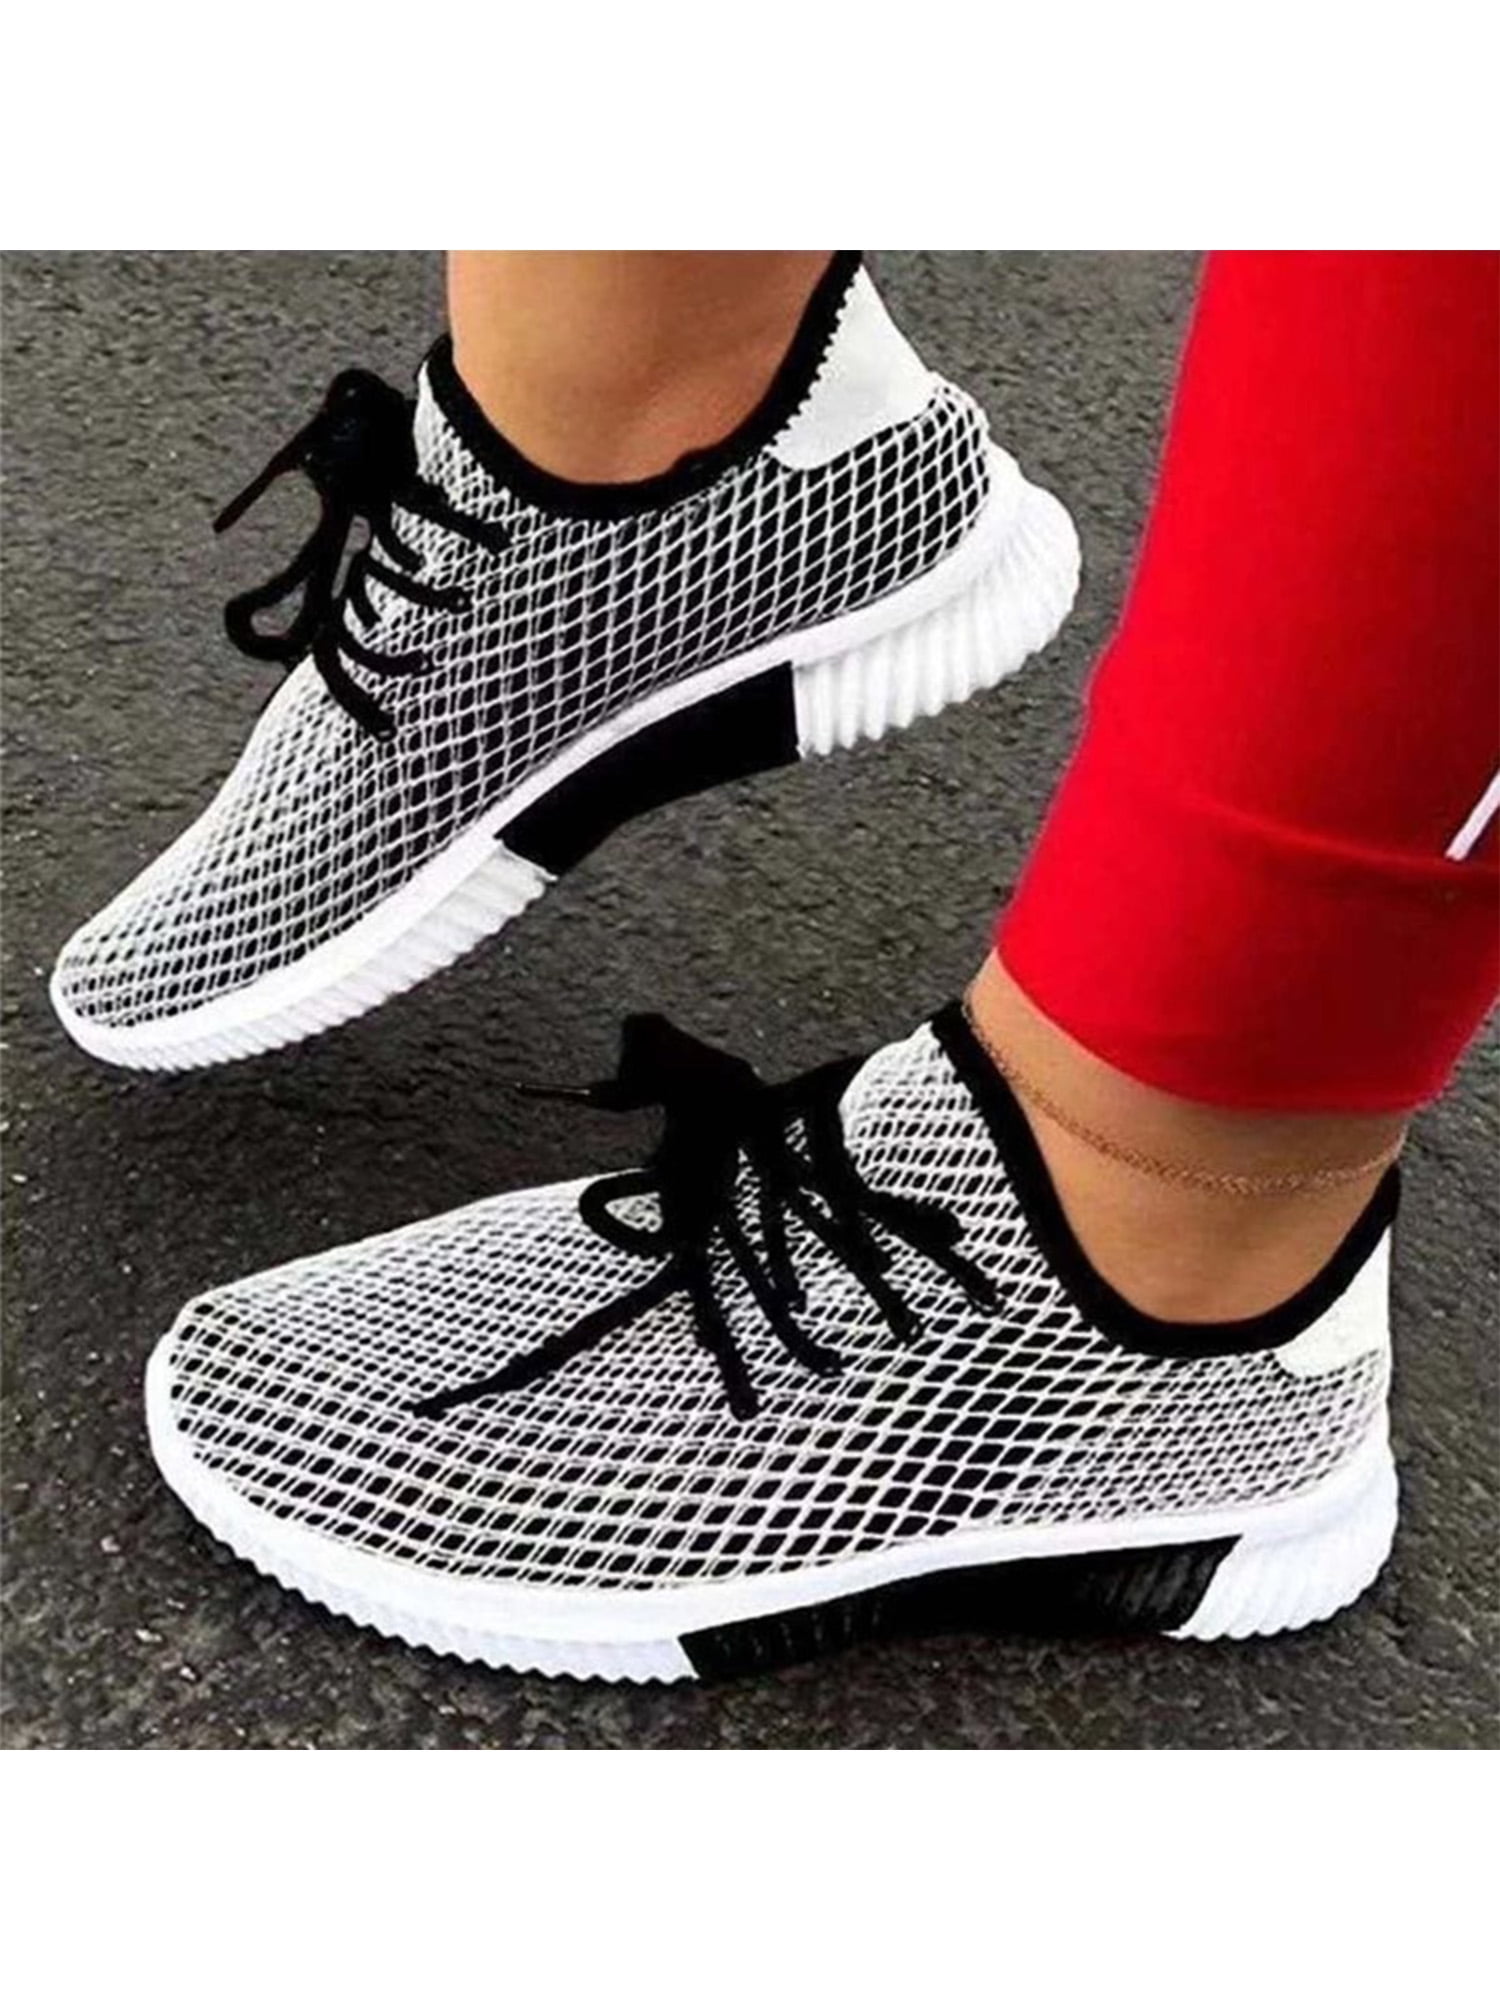 Women's Tennis Walking Running Sneakers Casual Athletic Breathable Sports Shoes 